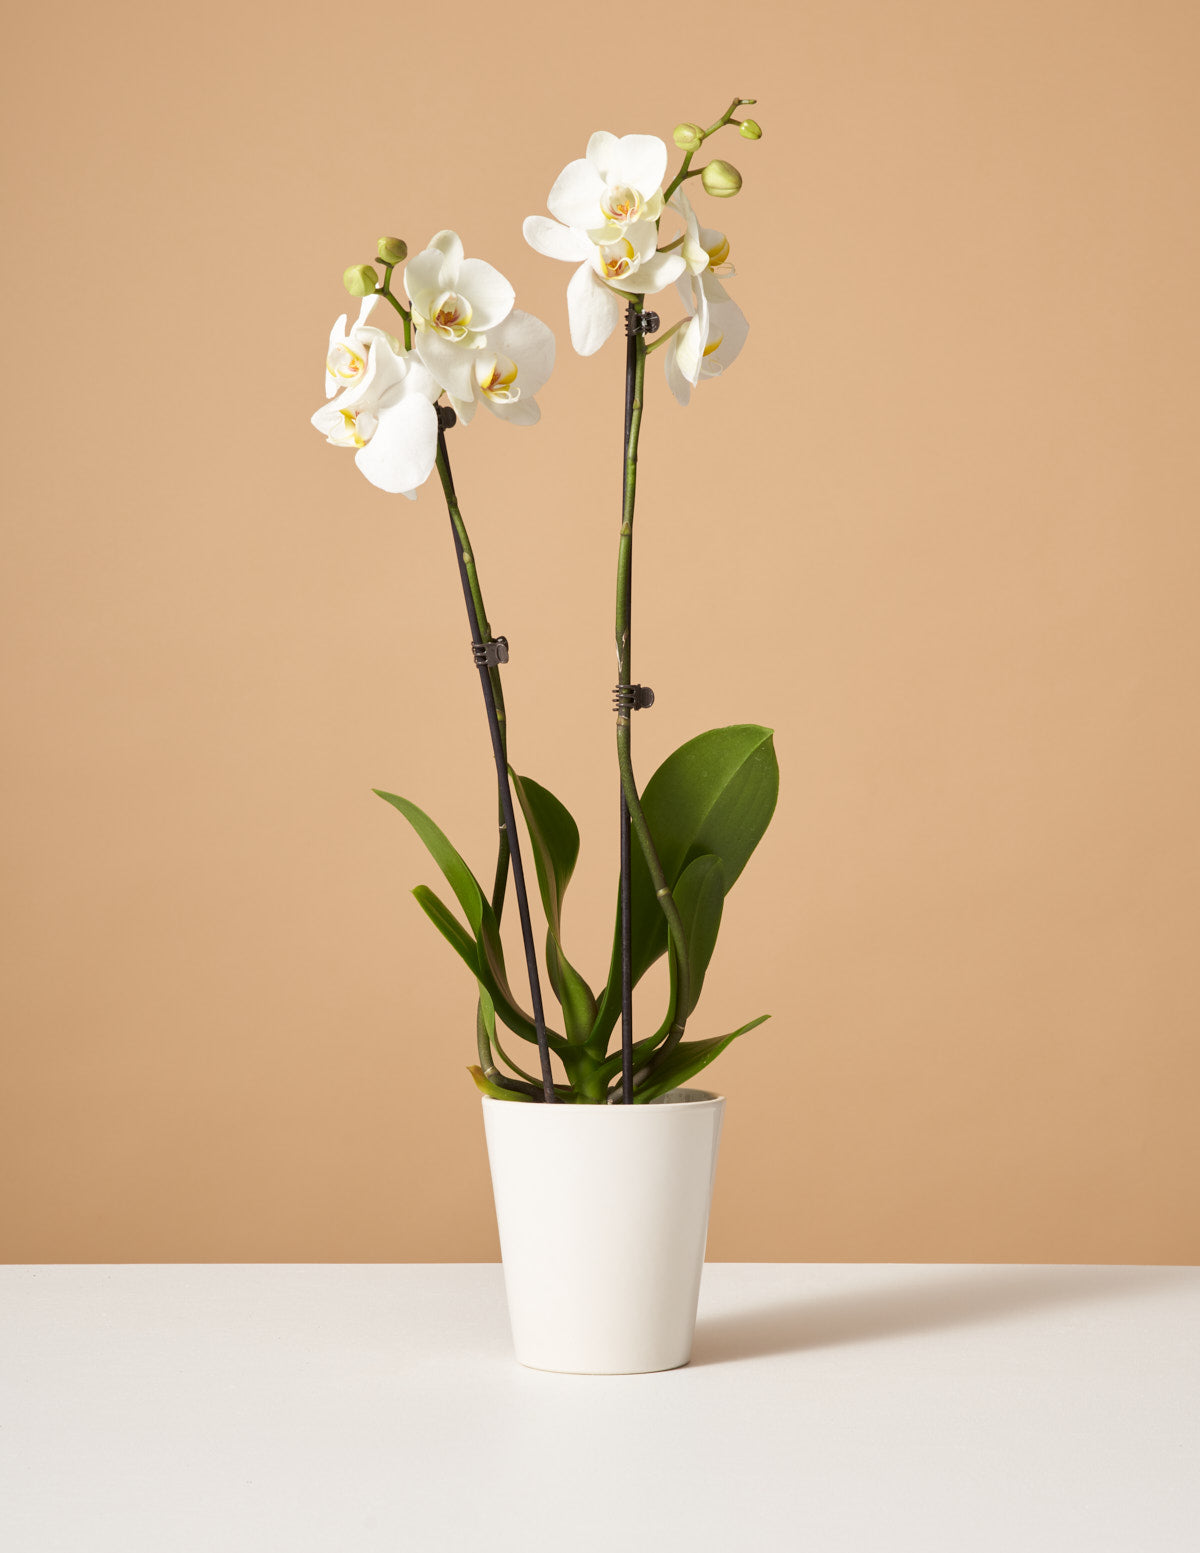 White Orchid Houseplant | Plants for Delivery Sill